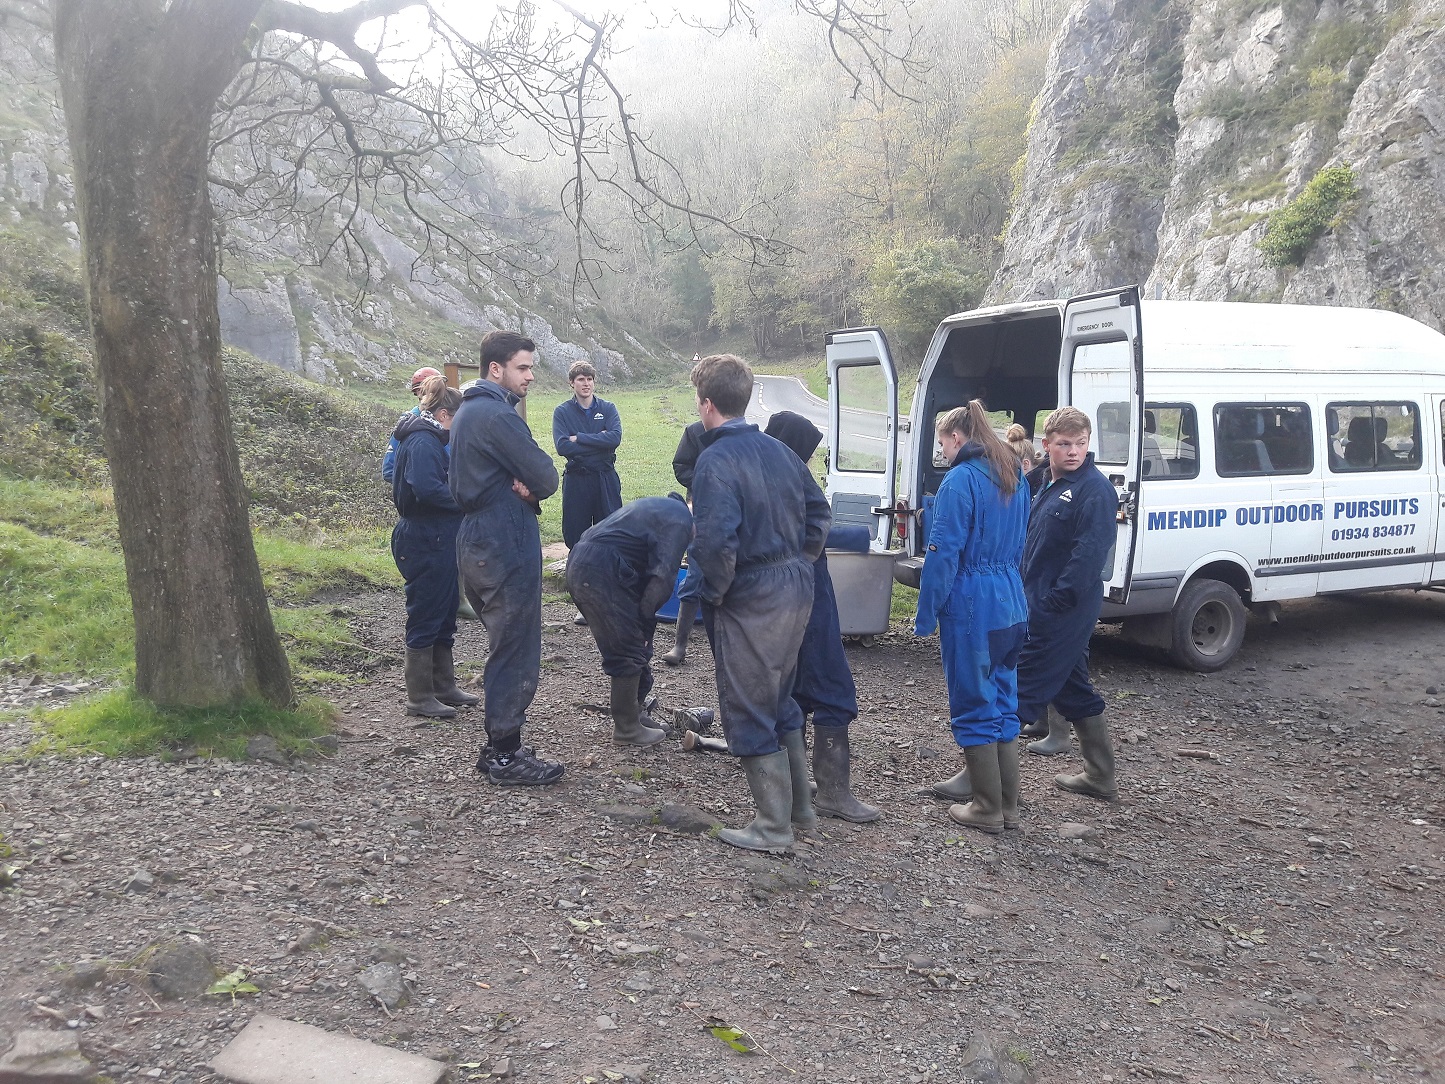 Adventure and outdoor management students at Mendip outdoor pursuits